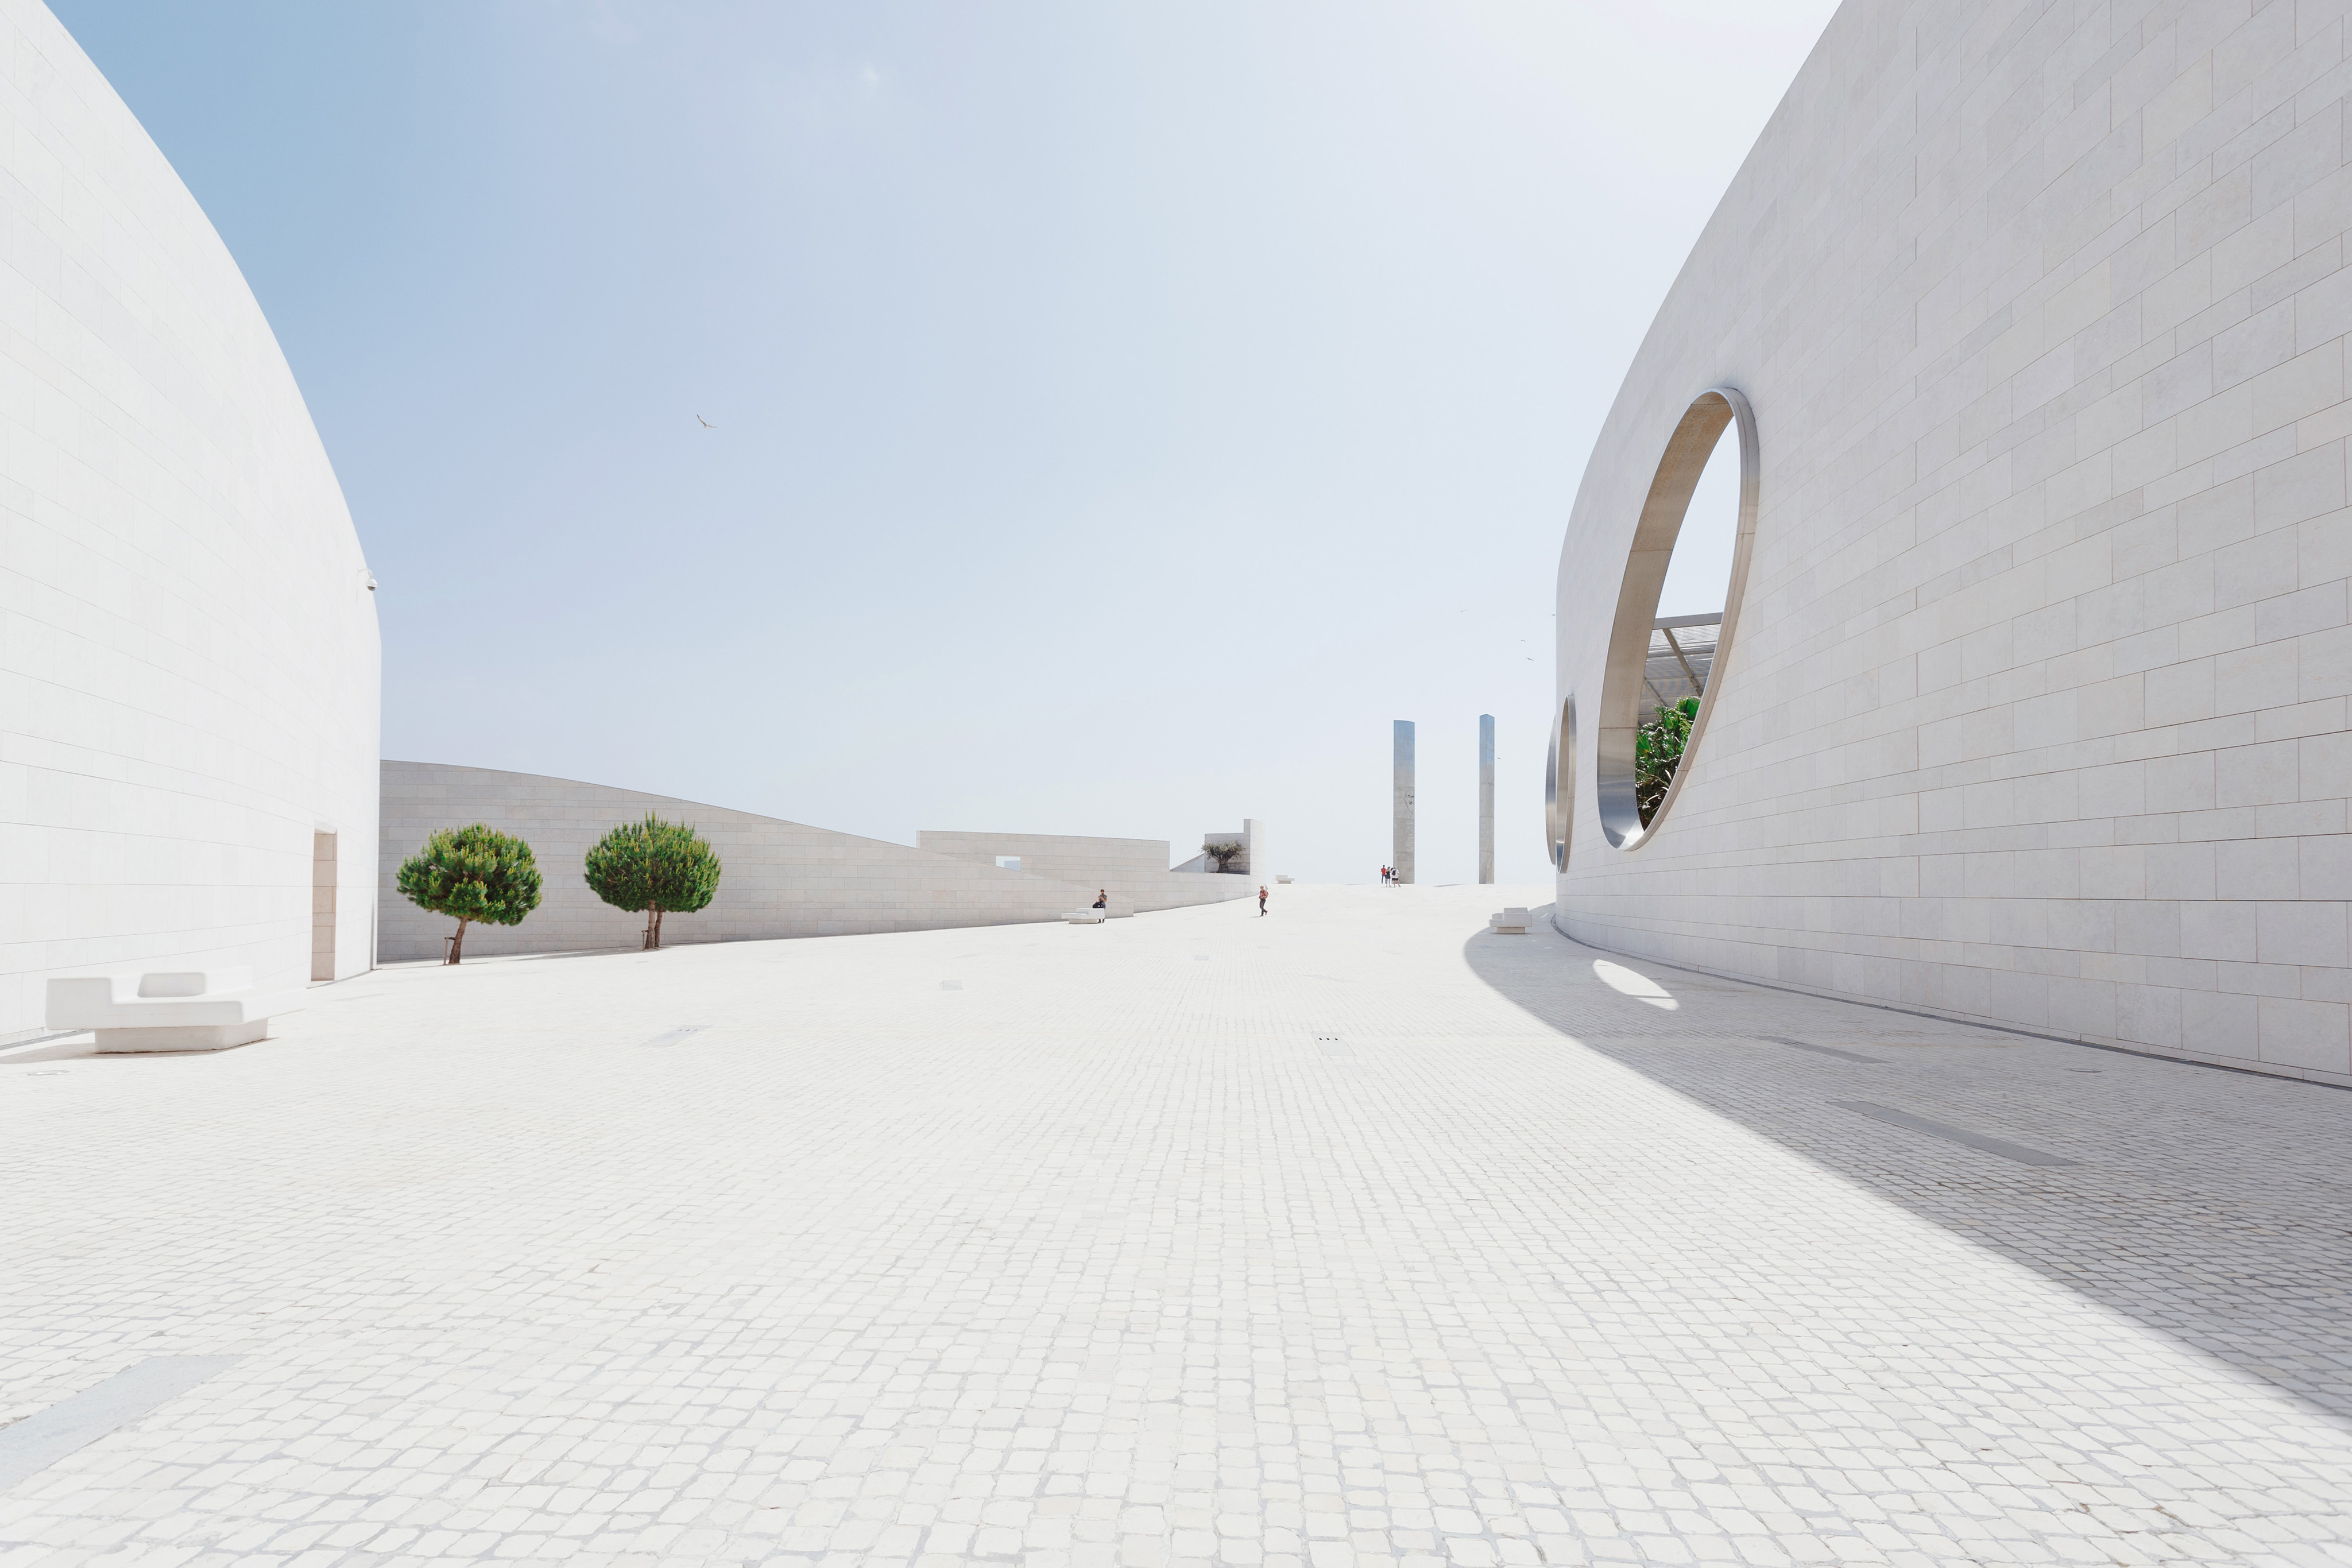 Meet us at the Champalimaud Foundation